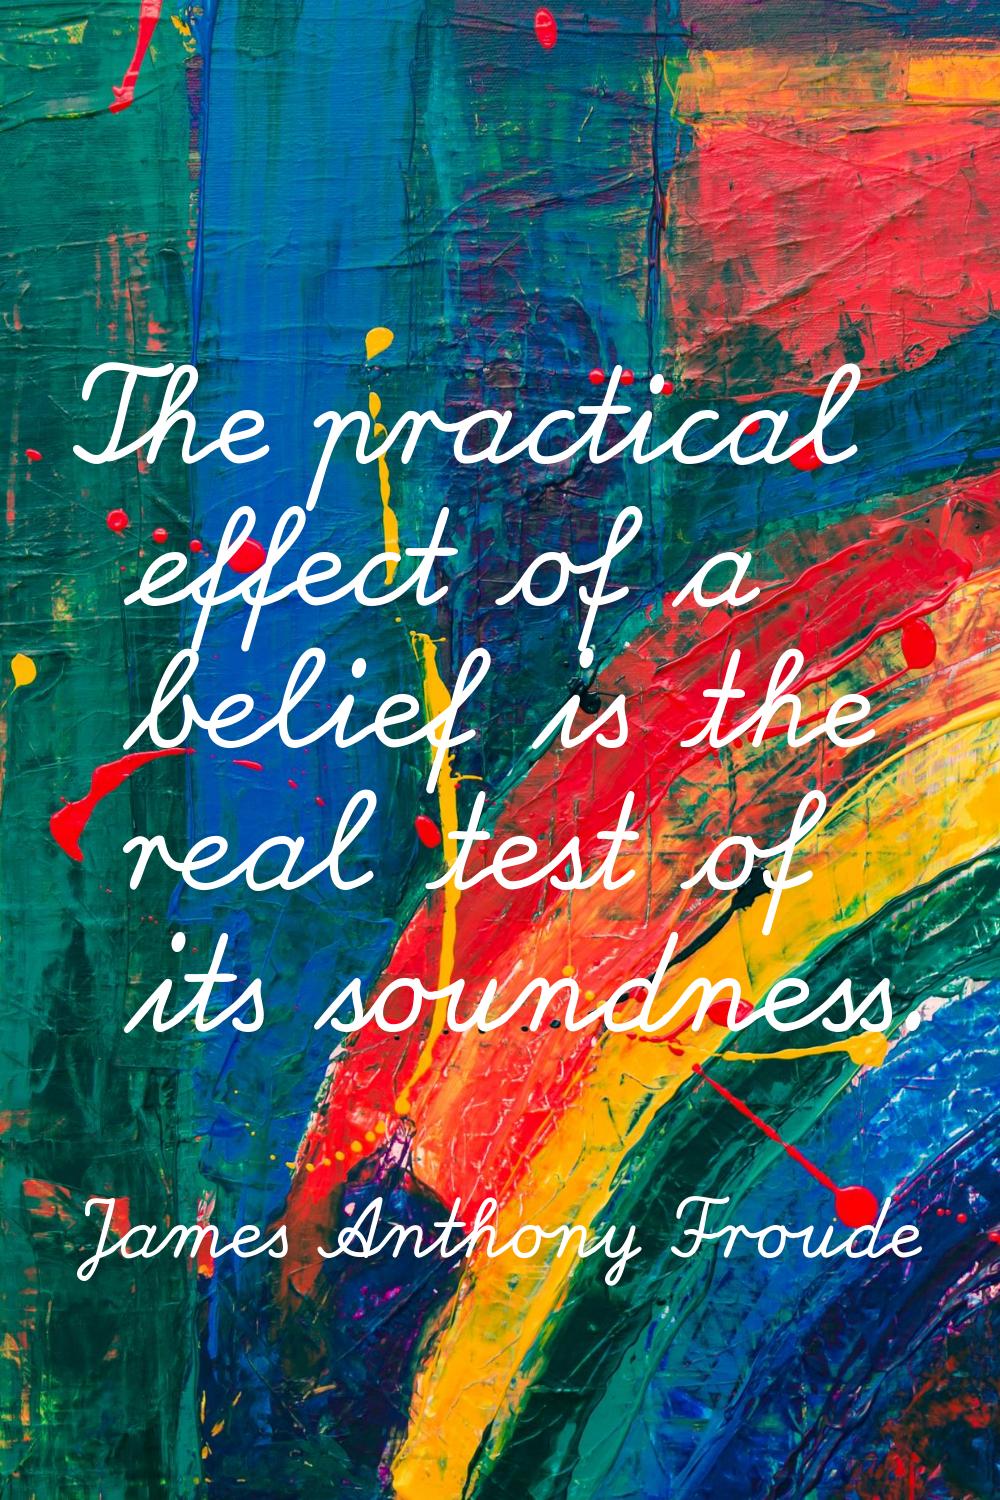 The practical effect of a belief is the real test of its soundness.